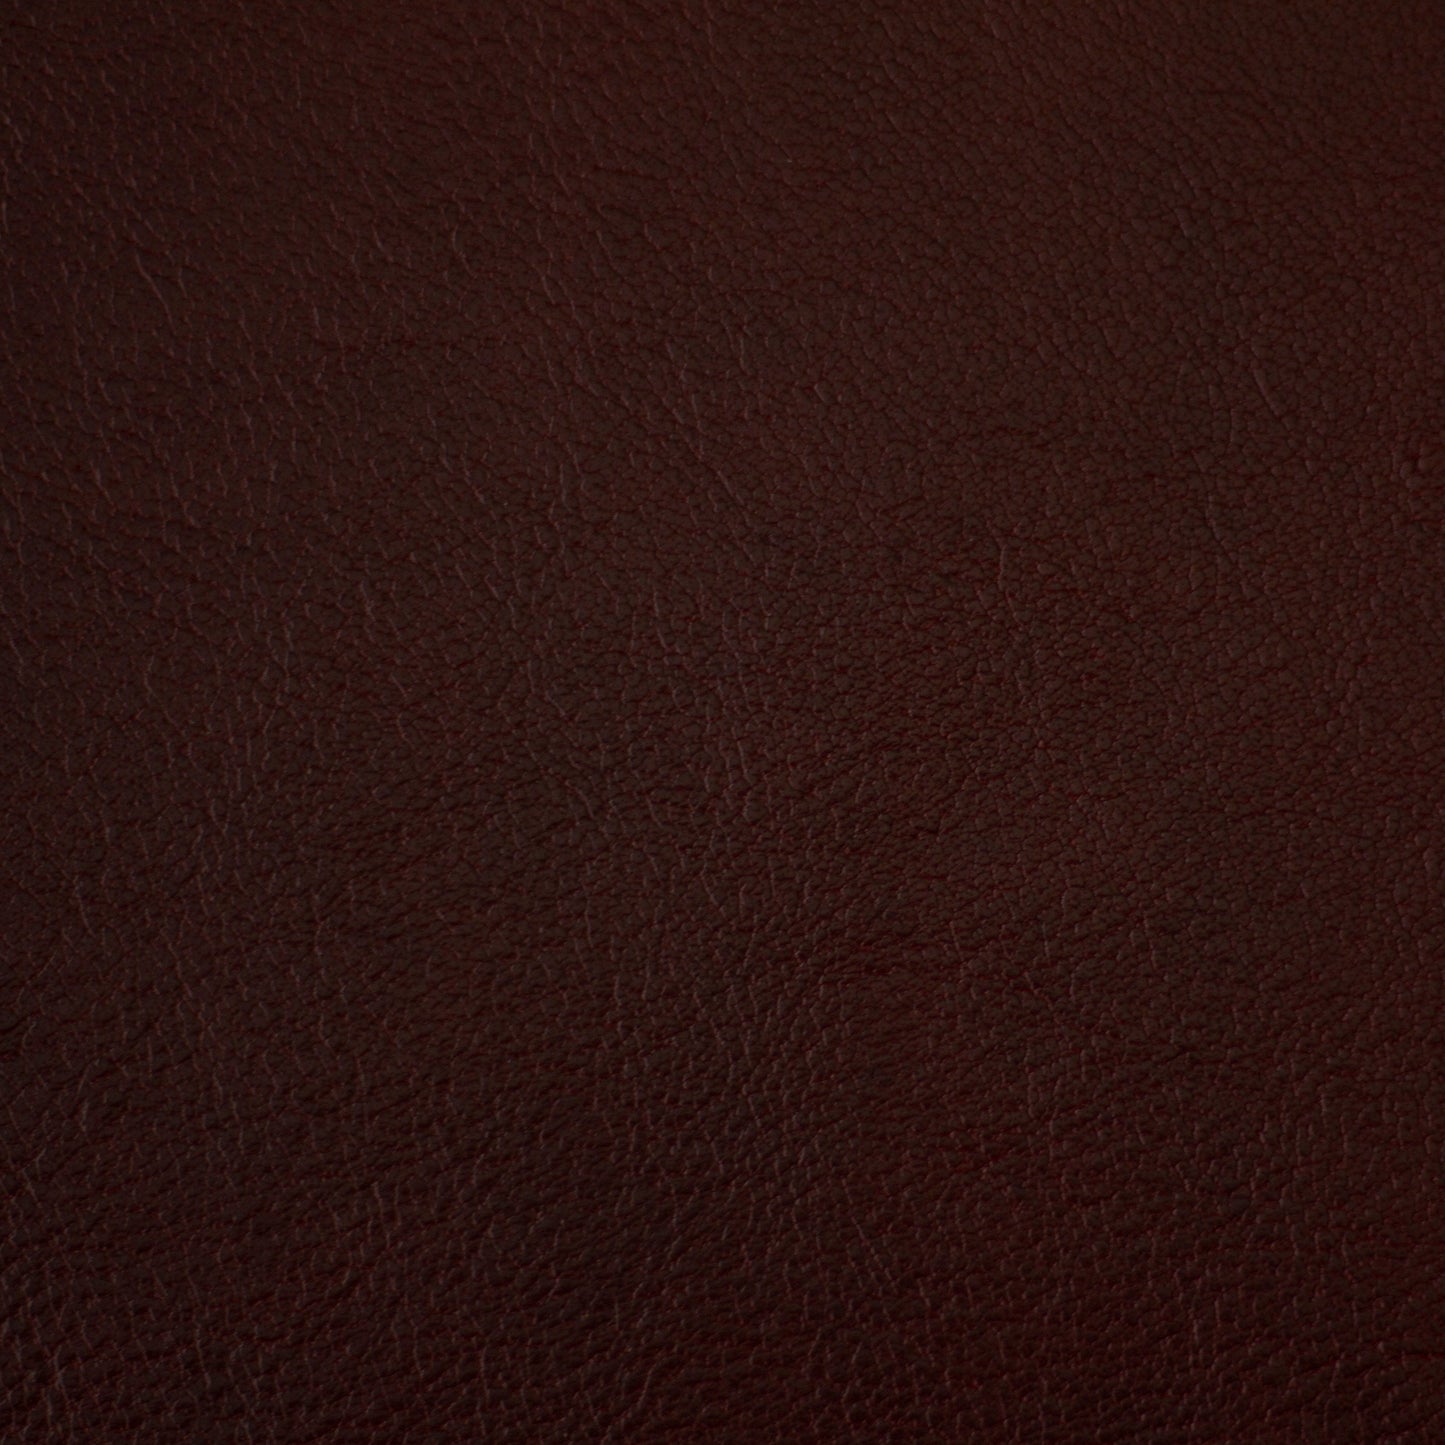 Conquer, Rose, Spilltop® Water Resistance, Hospitality Leather Hide